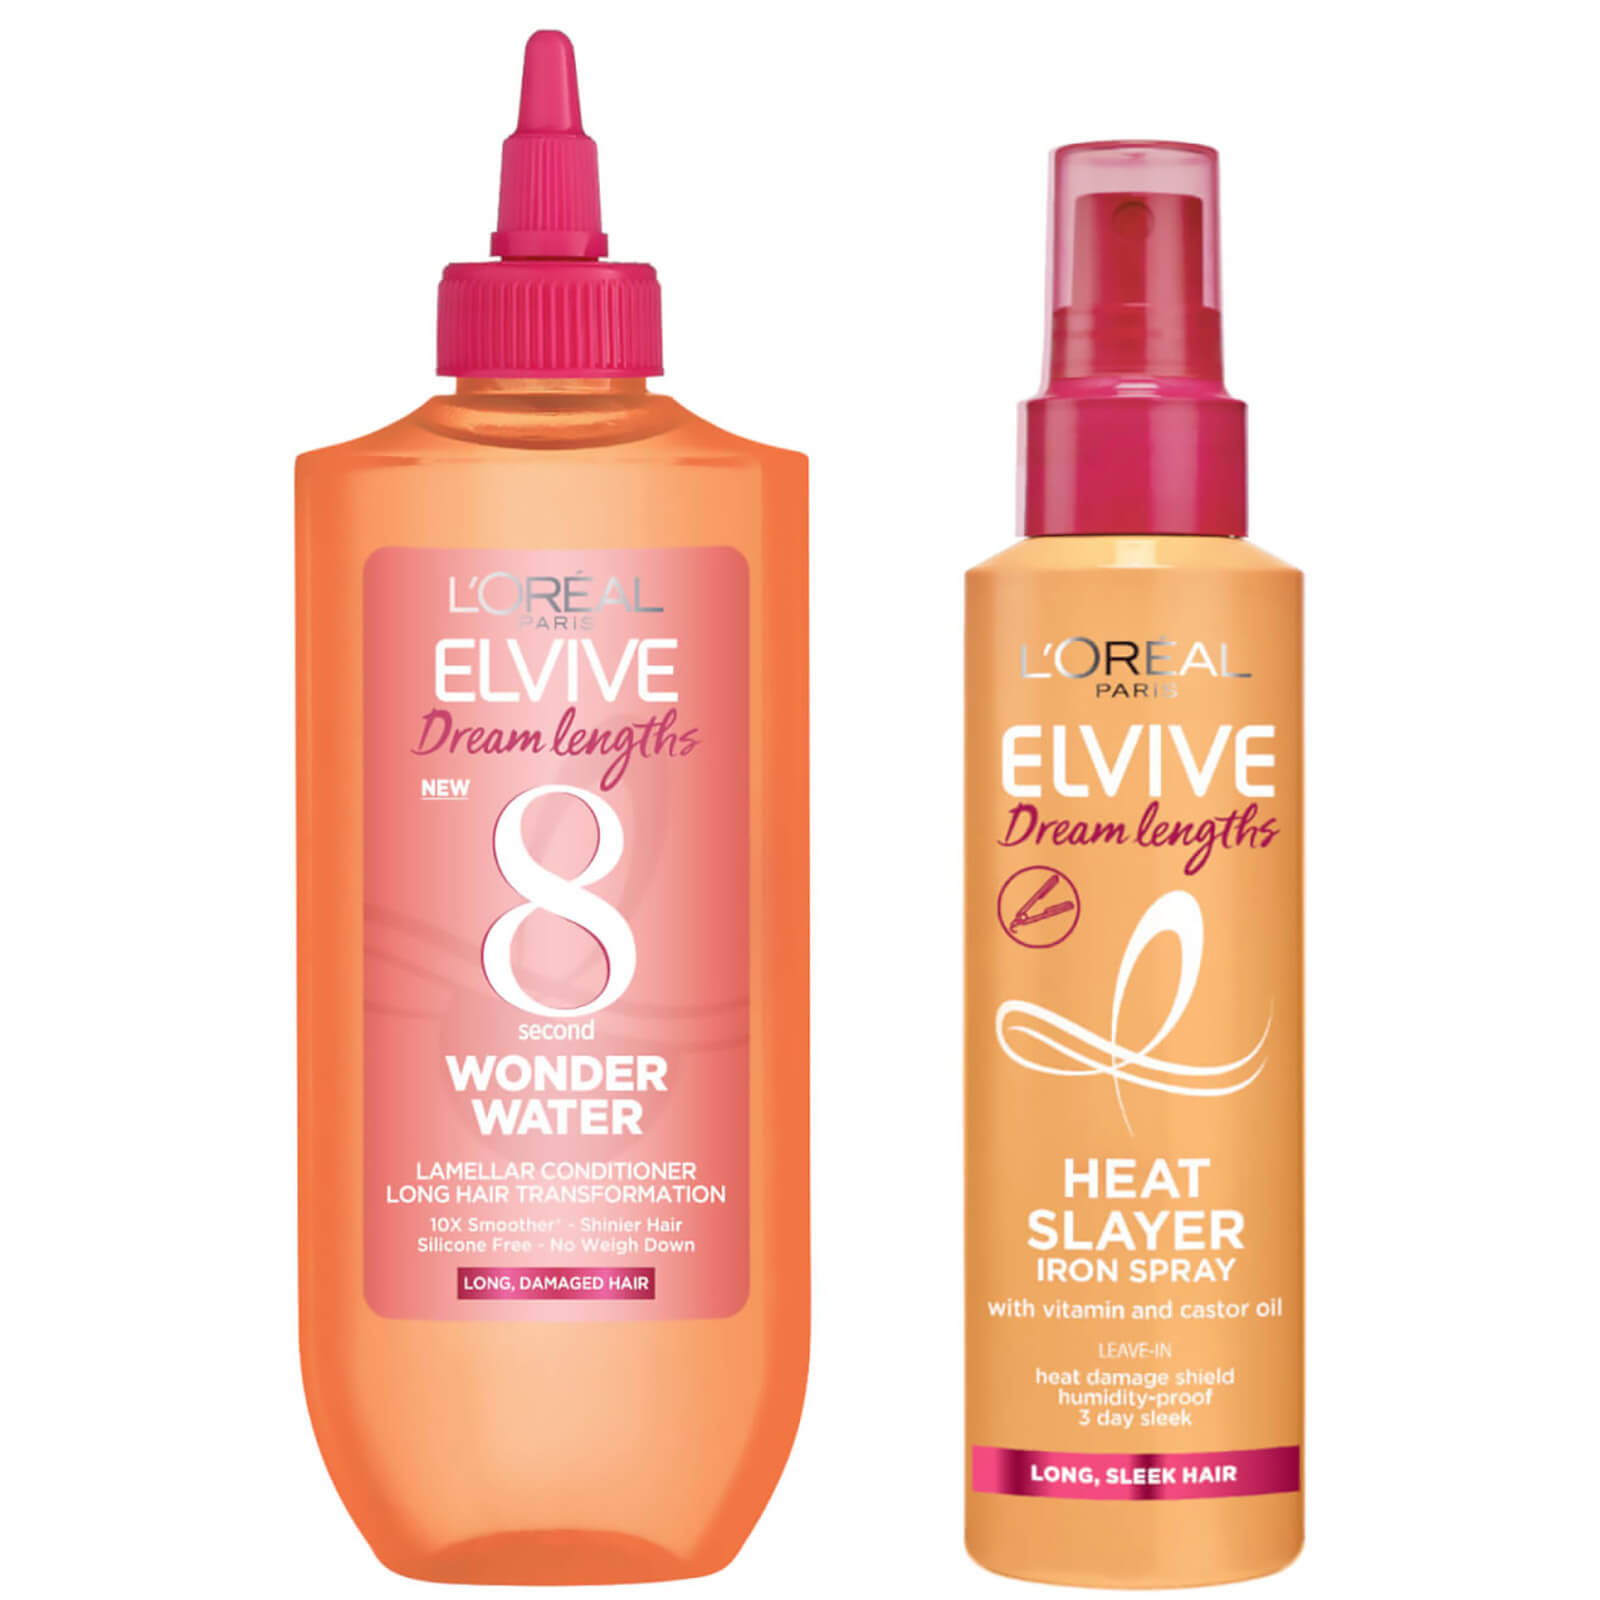 L'Oreal Paris Elvive Dream Duo - Wonder Water Treatment and Heat Slayer Protect Spray